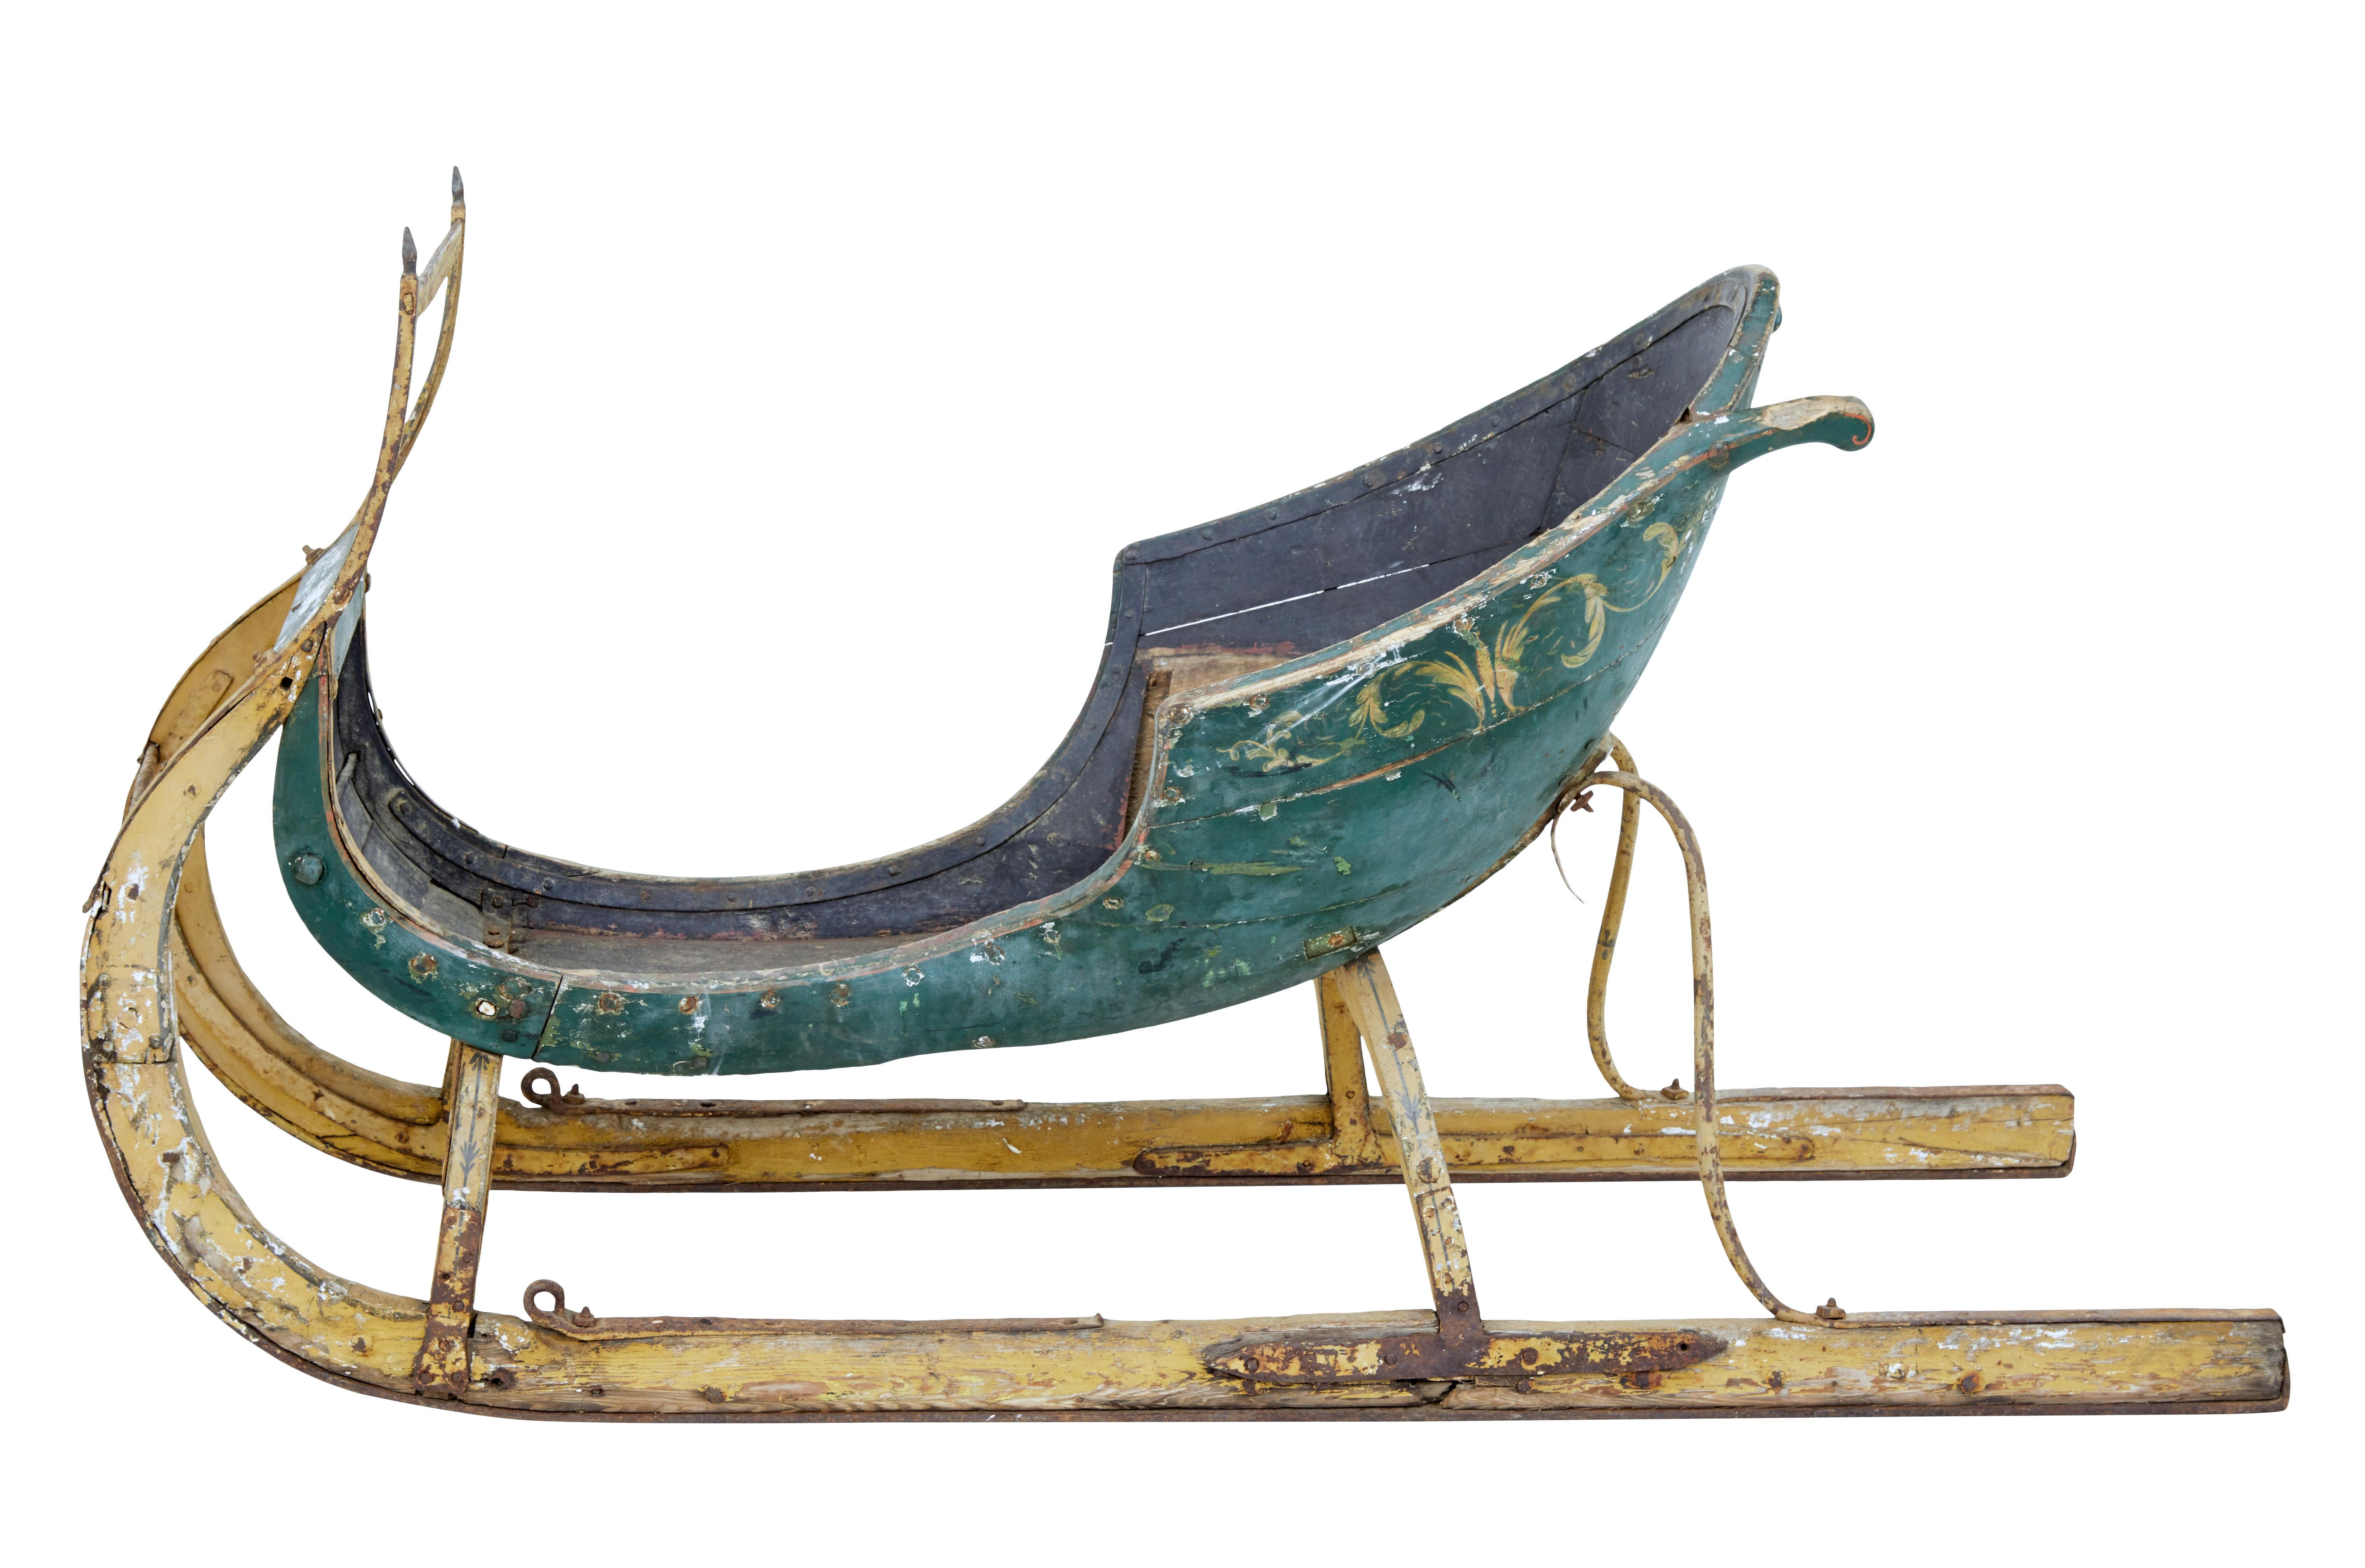 18th century hand painted Scandinavian sleigh, circa 1764.

We are pleased to offer this fine piece of Scandinavian hand painted Folk Art. Decorated in a green and yellow scheme. Elegant shape to allow this sled to be pulled by a team of